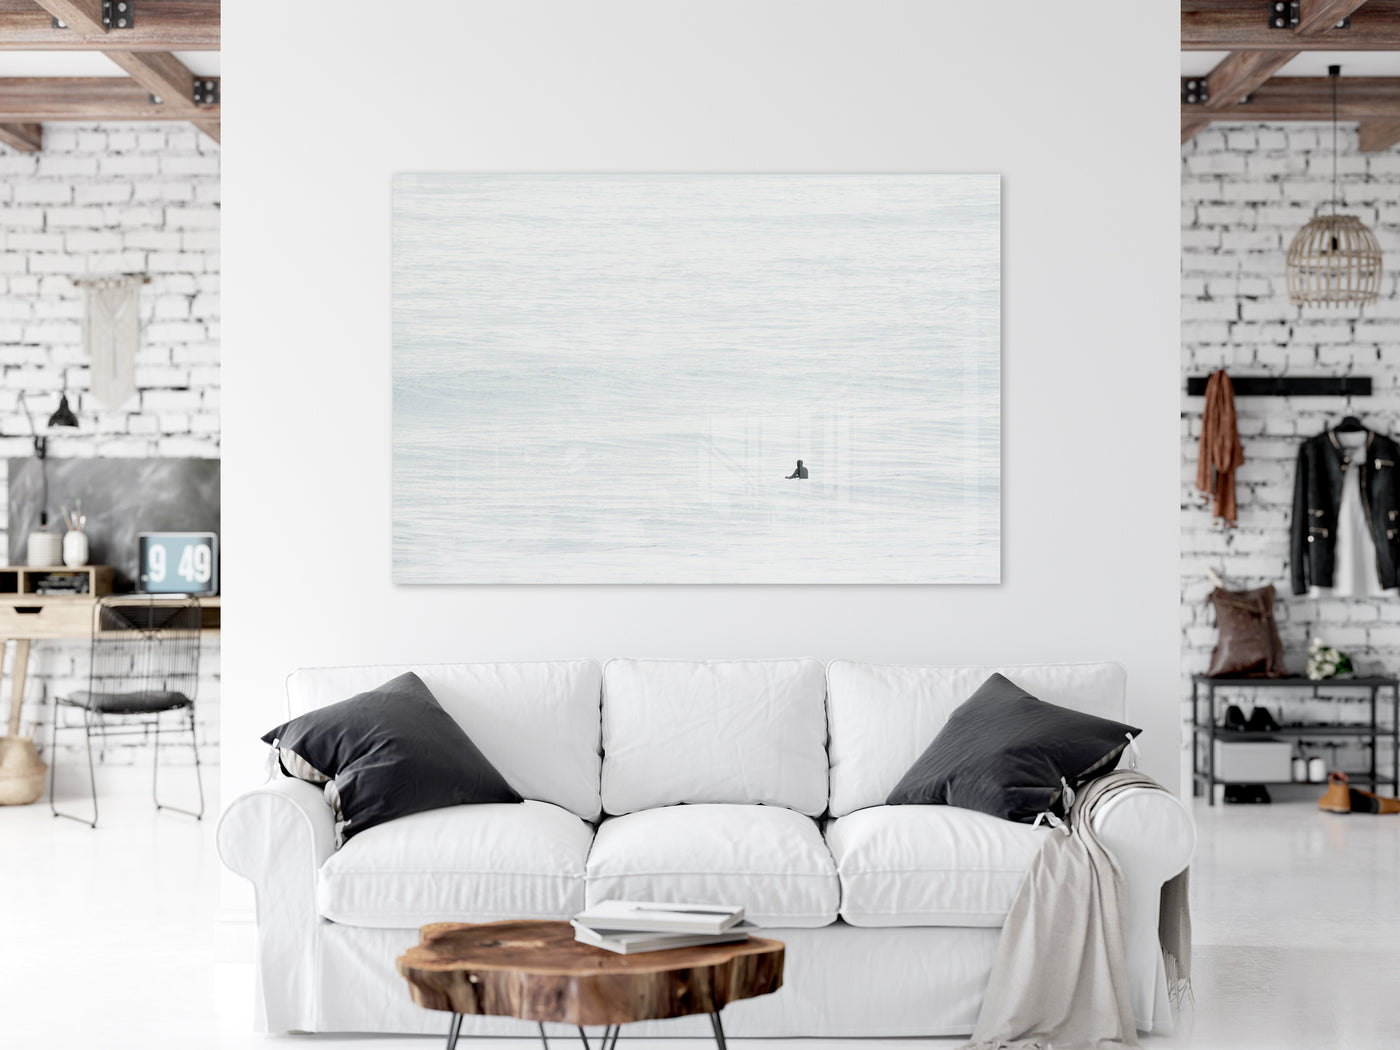 Surfing photography prints on acrylic glass by Cattie Coyle Photography